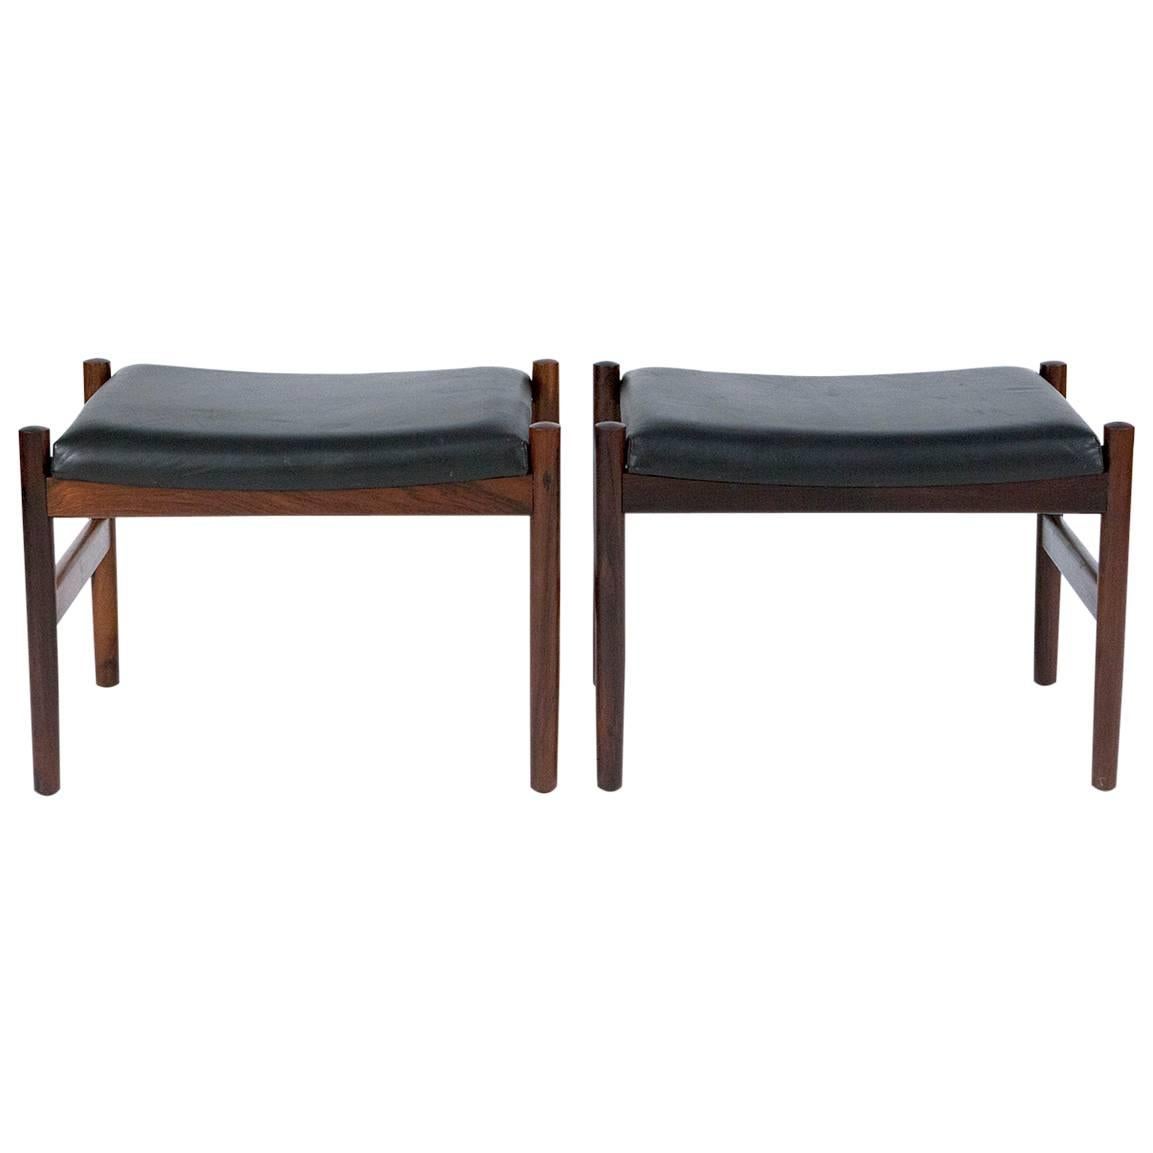 Danish Rosewood and Leather Stools